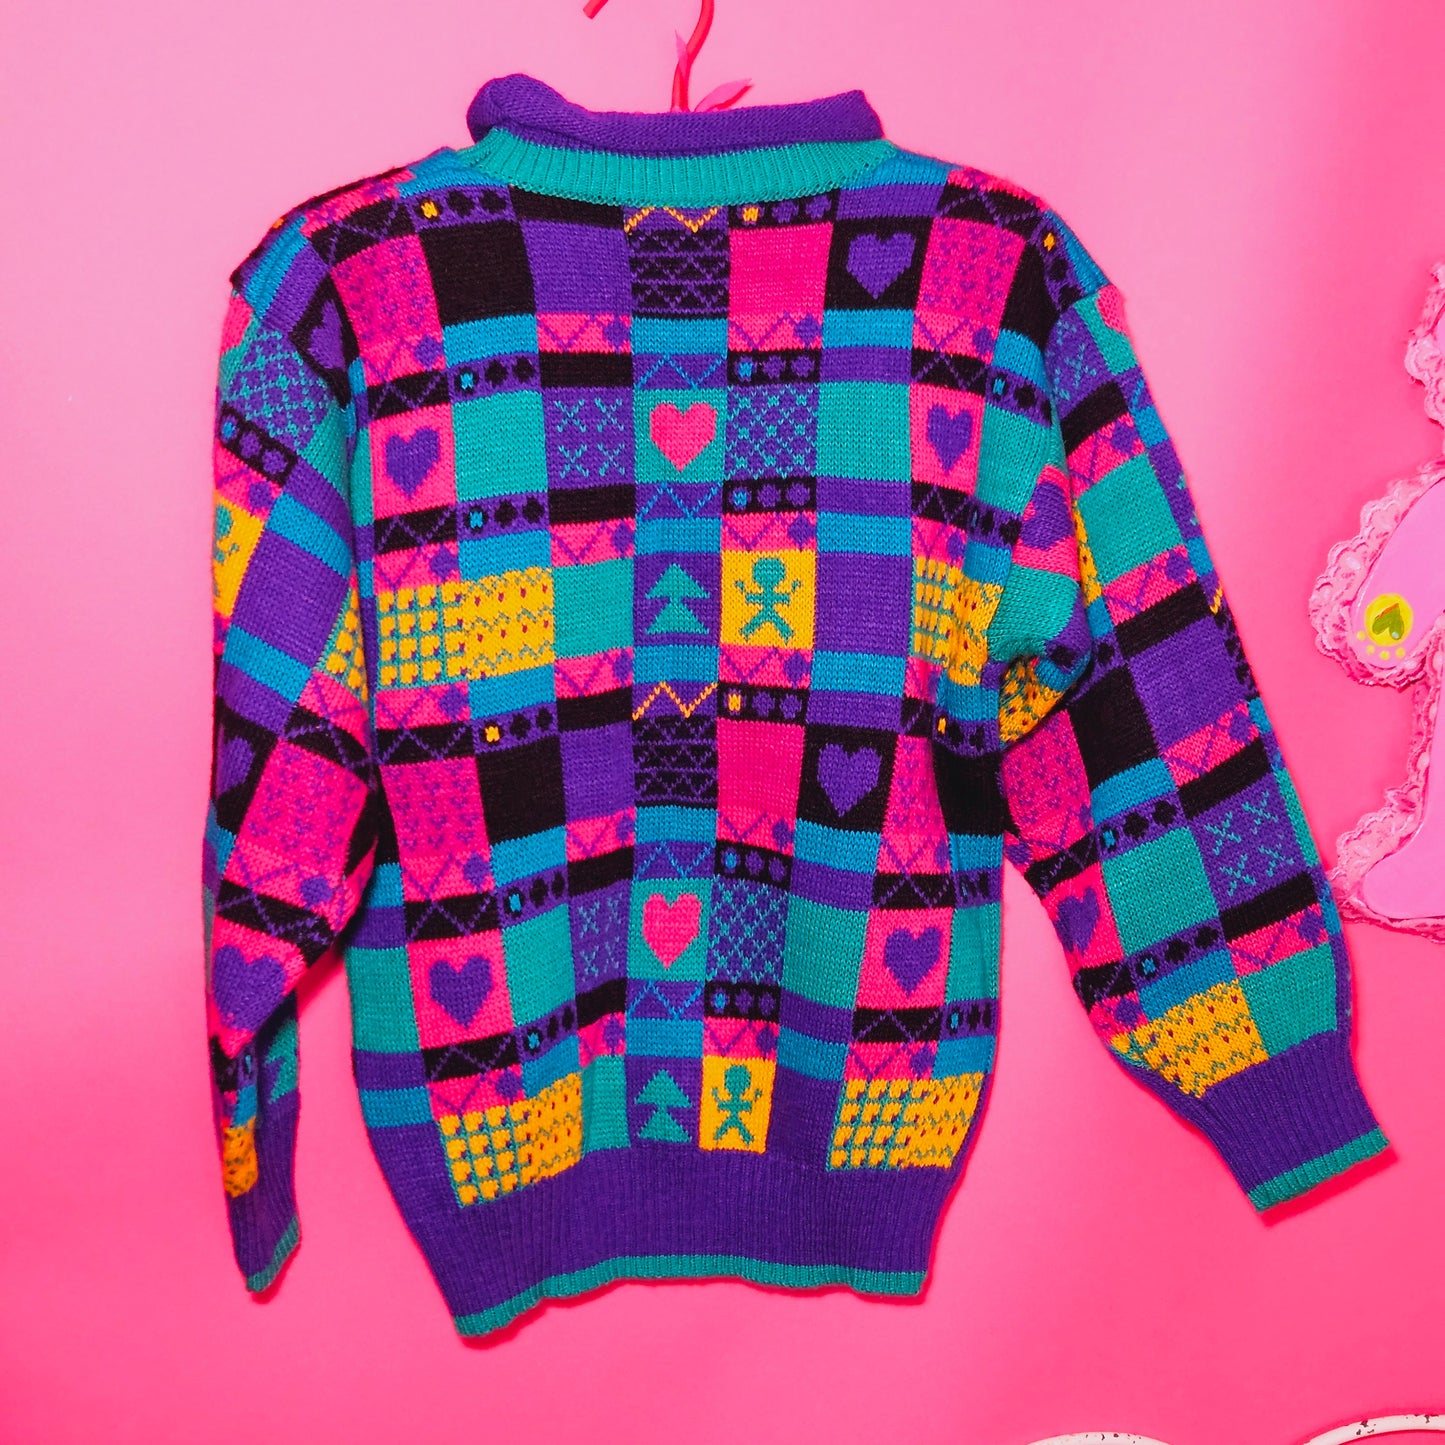 90s kid colorful knit